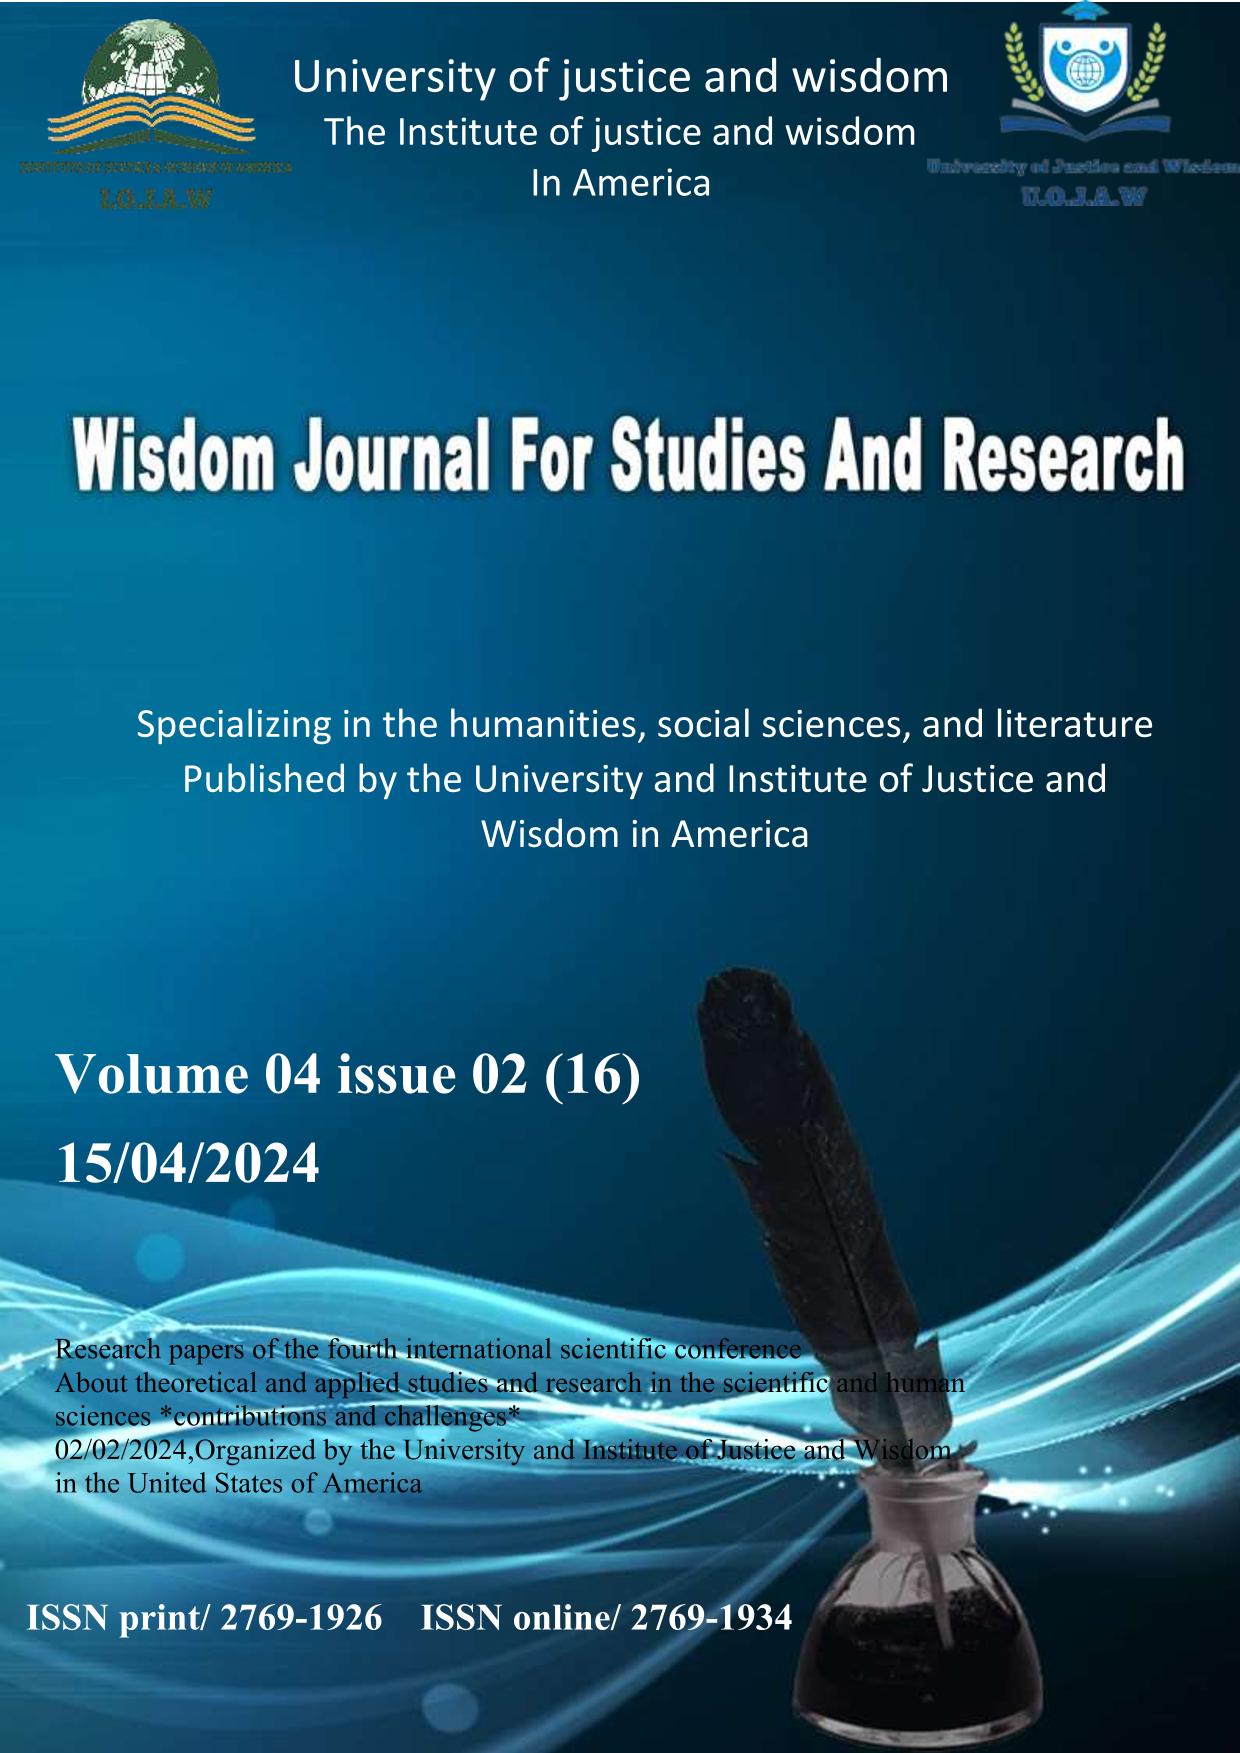 					View Vol. 4 No. 02 (2024): Wisdom Journal For Studies And Research volume 04 Issue 02(16)15/04/2024  
				